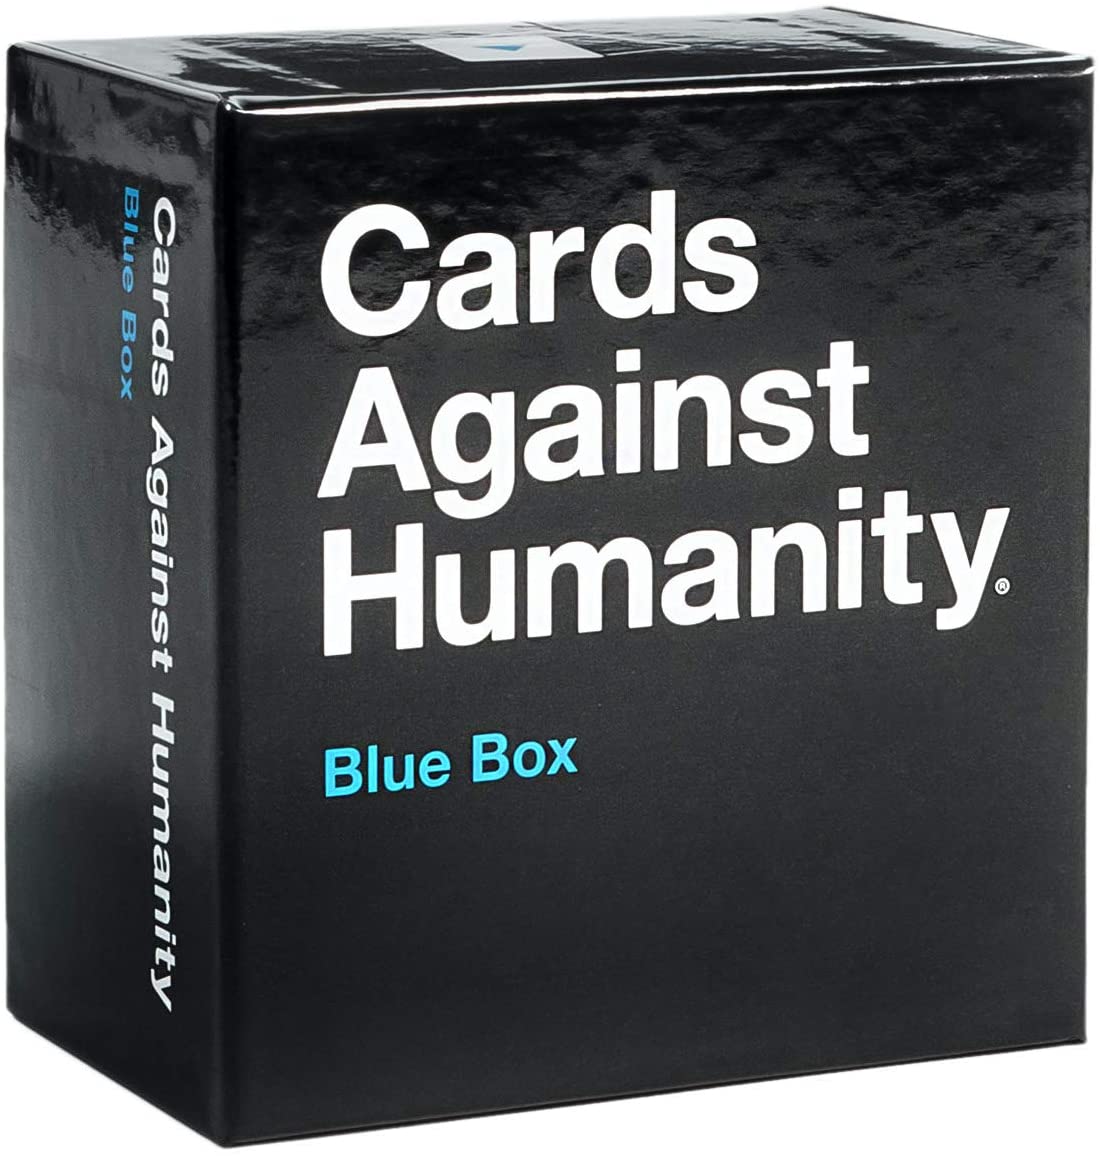 Extensie - Cards Against Humanity: Blue Box - Lb. Engleza | Cards Against Humanity image3